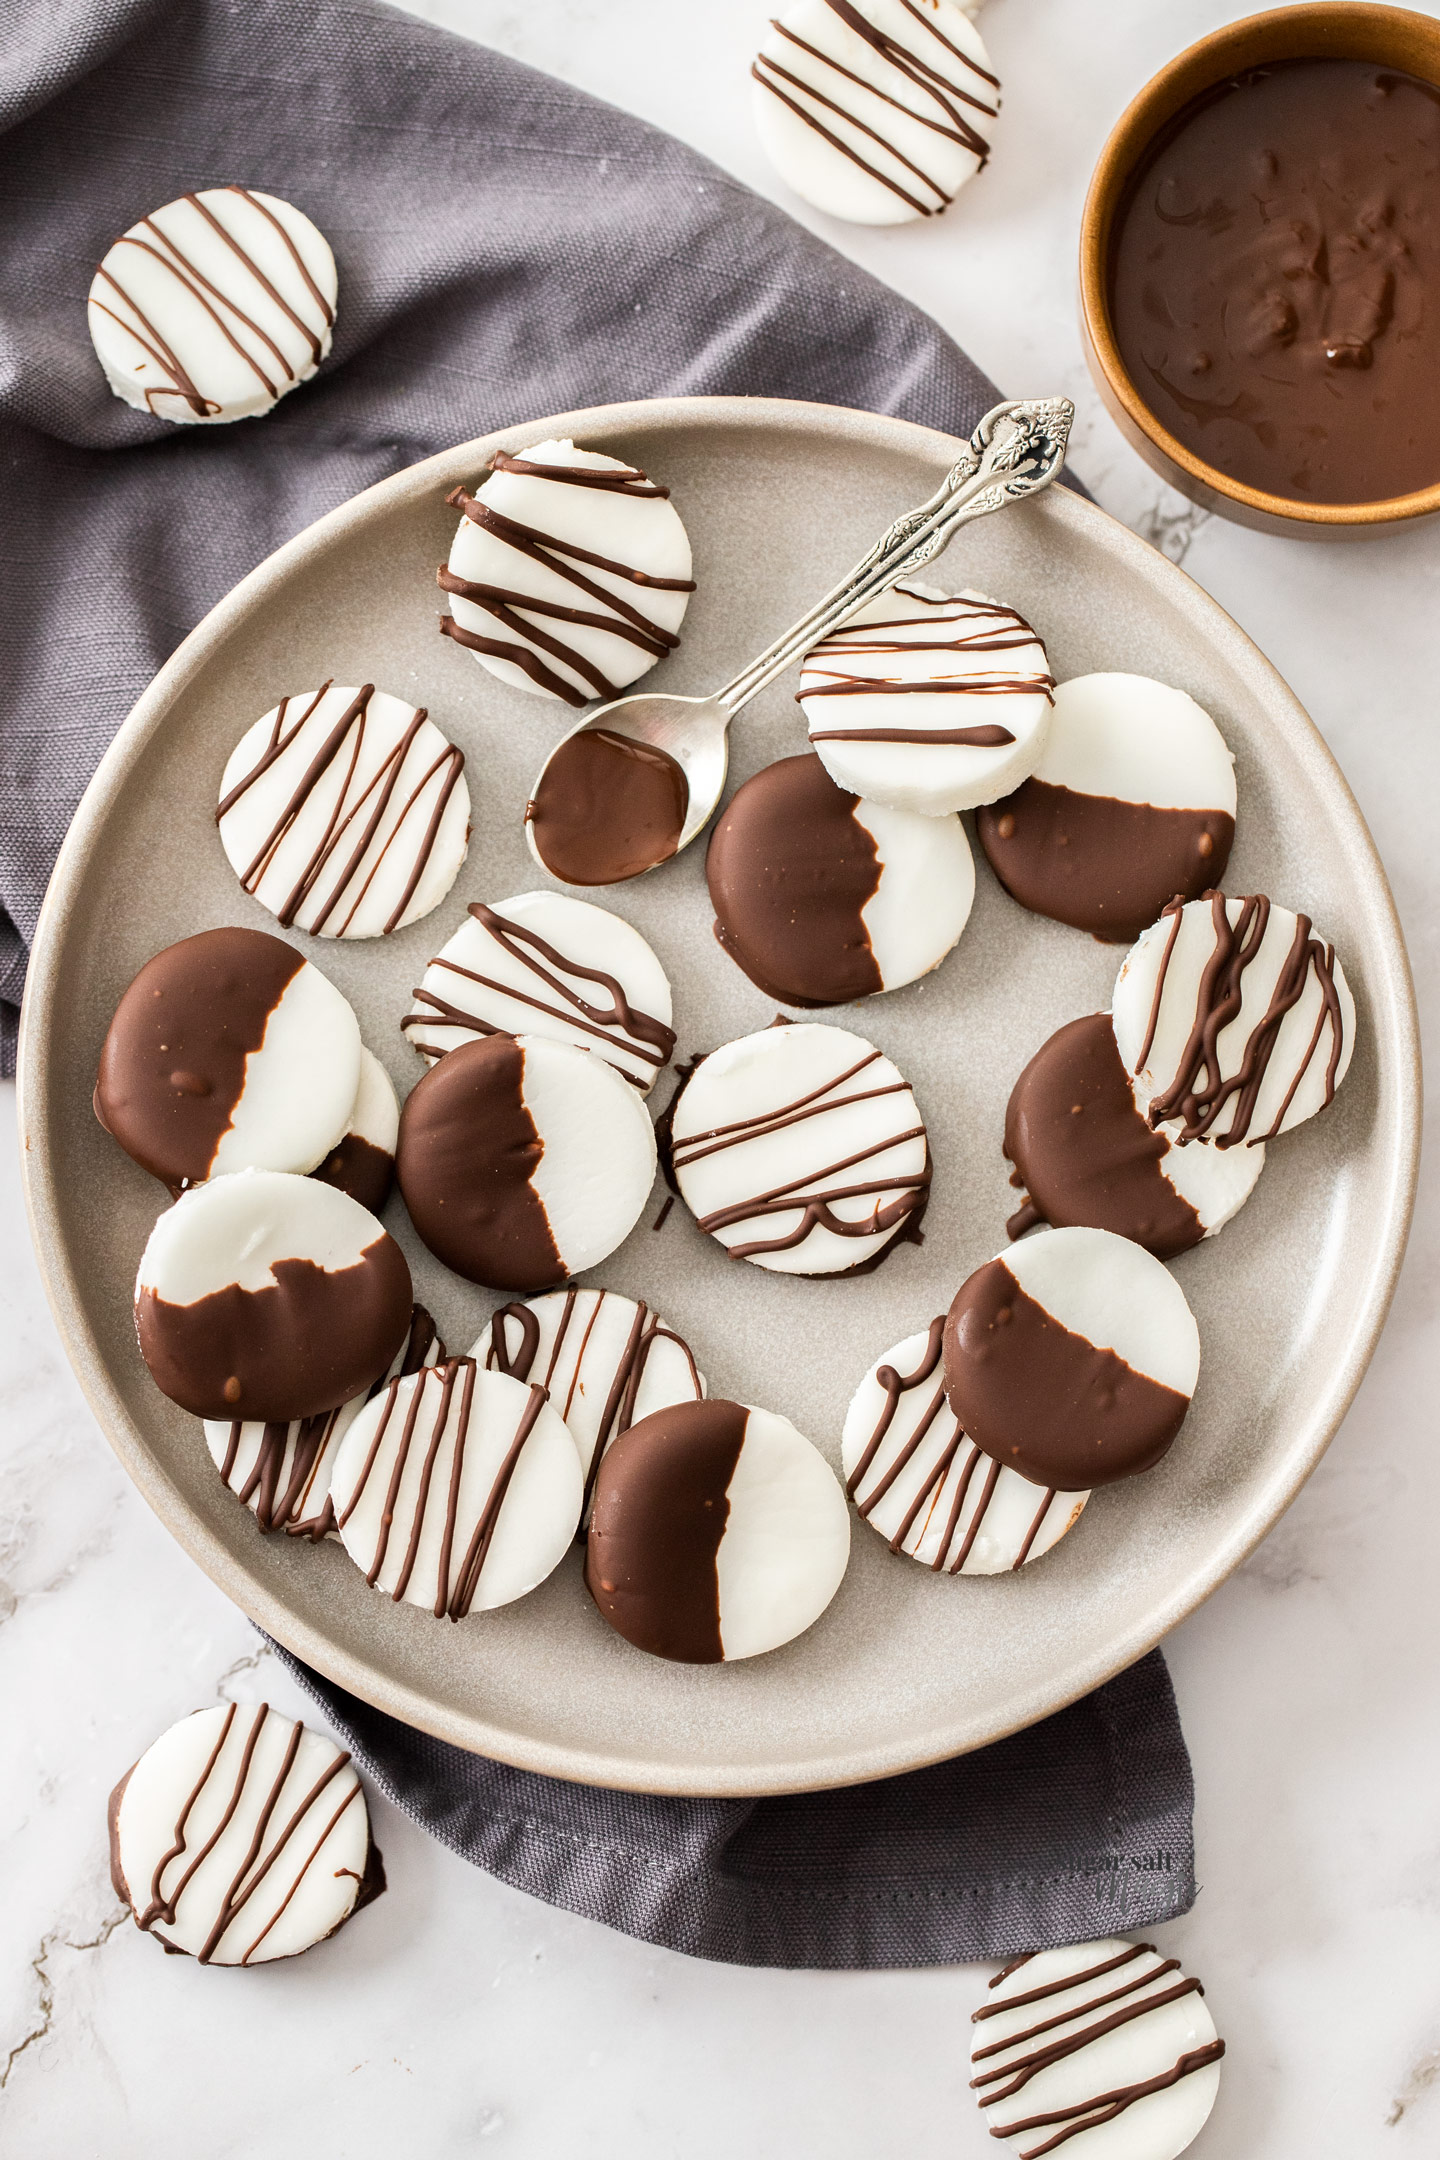 Top down view of peppermint creams on a plate.